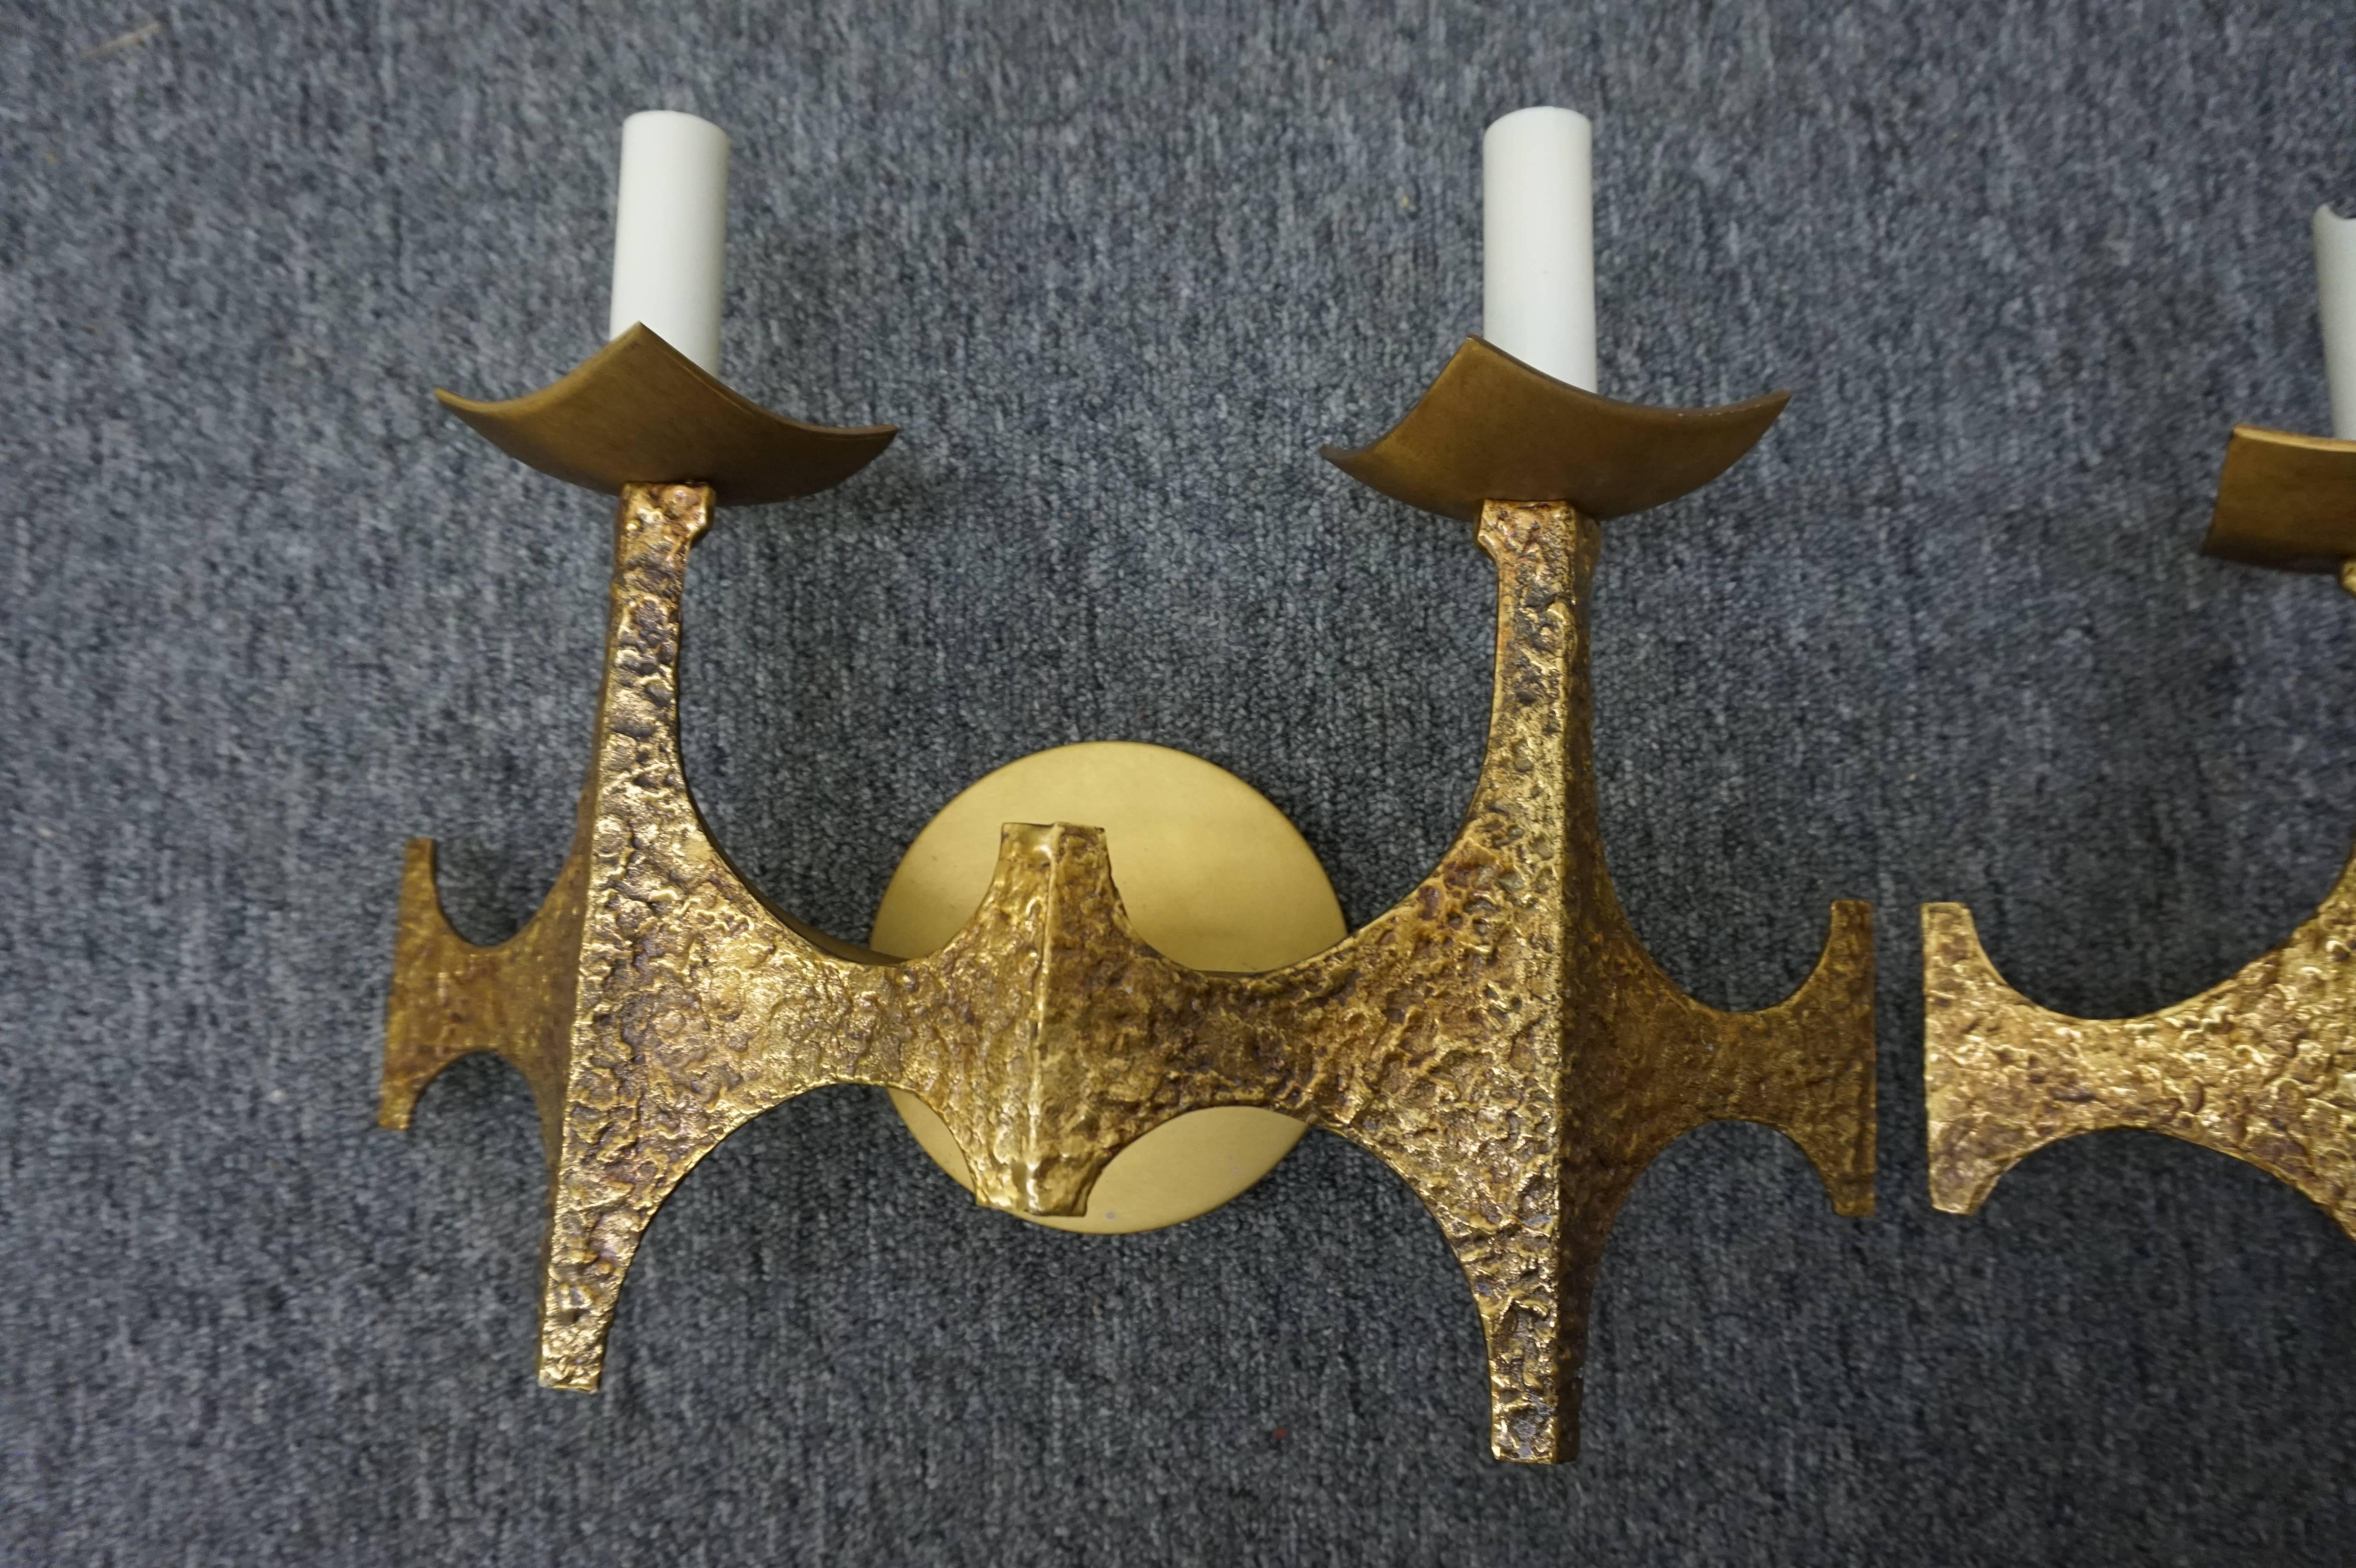 Pair of decorative Brutalist brass sconces, circa 1950. Wonderful hammered brass in a Gothic style-excellent vintage appeal.